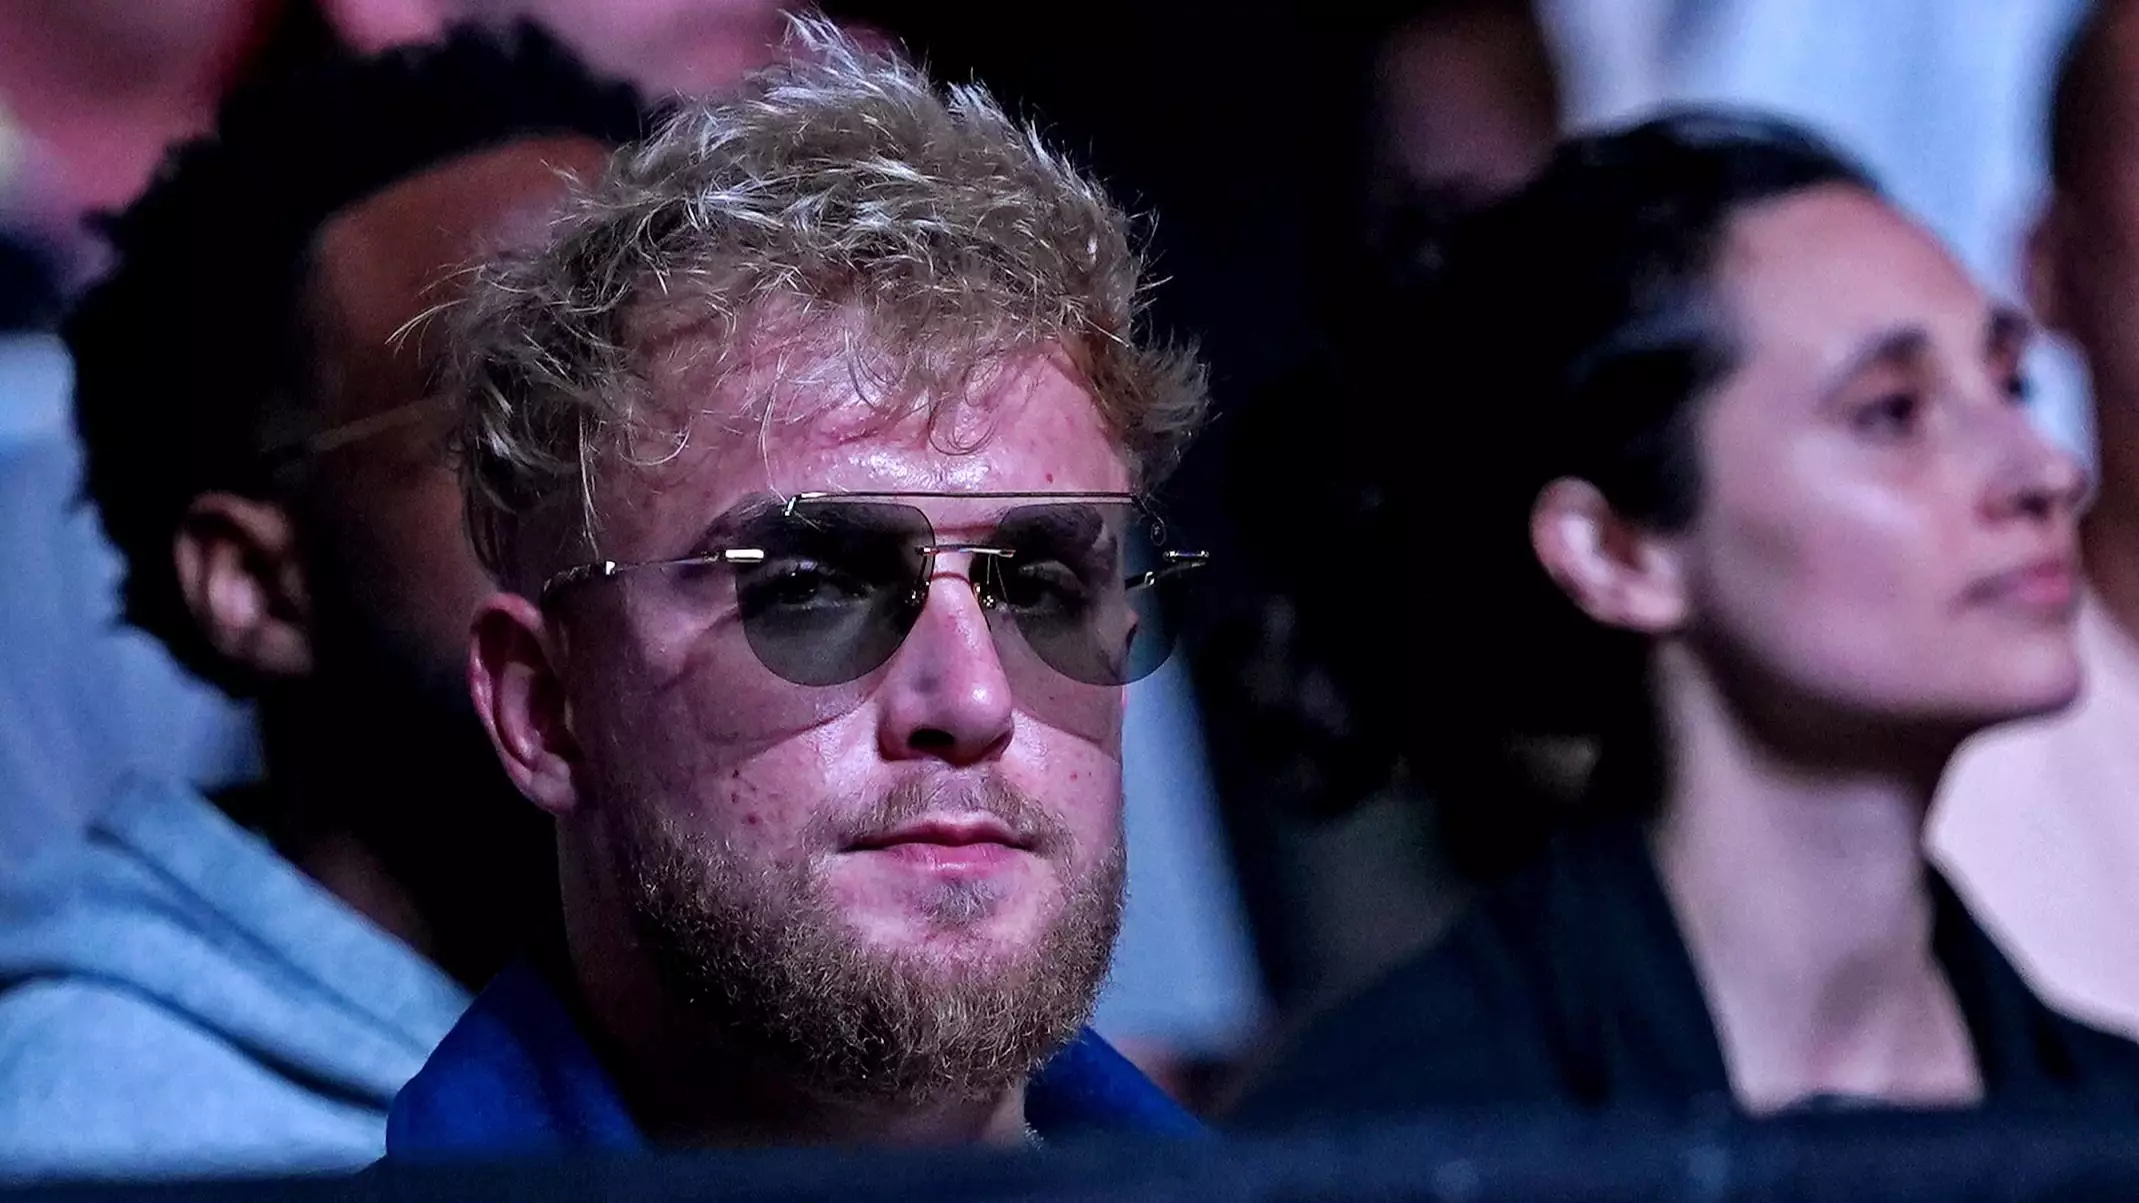 MMA Fans Chant 'F*** Jake Paul' After He Turns Up At UFC 261